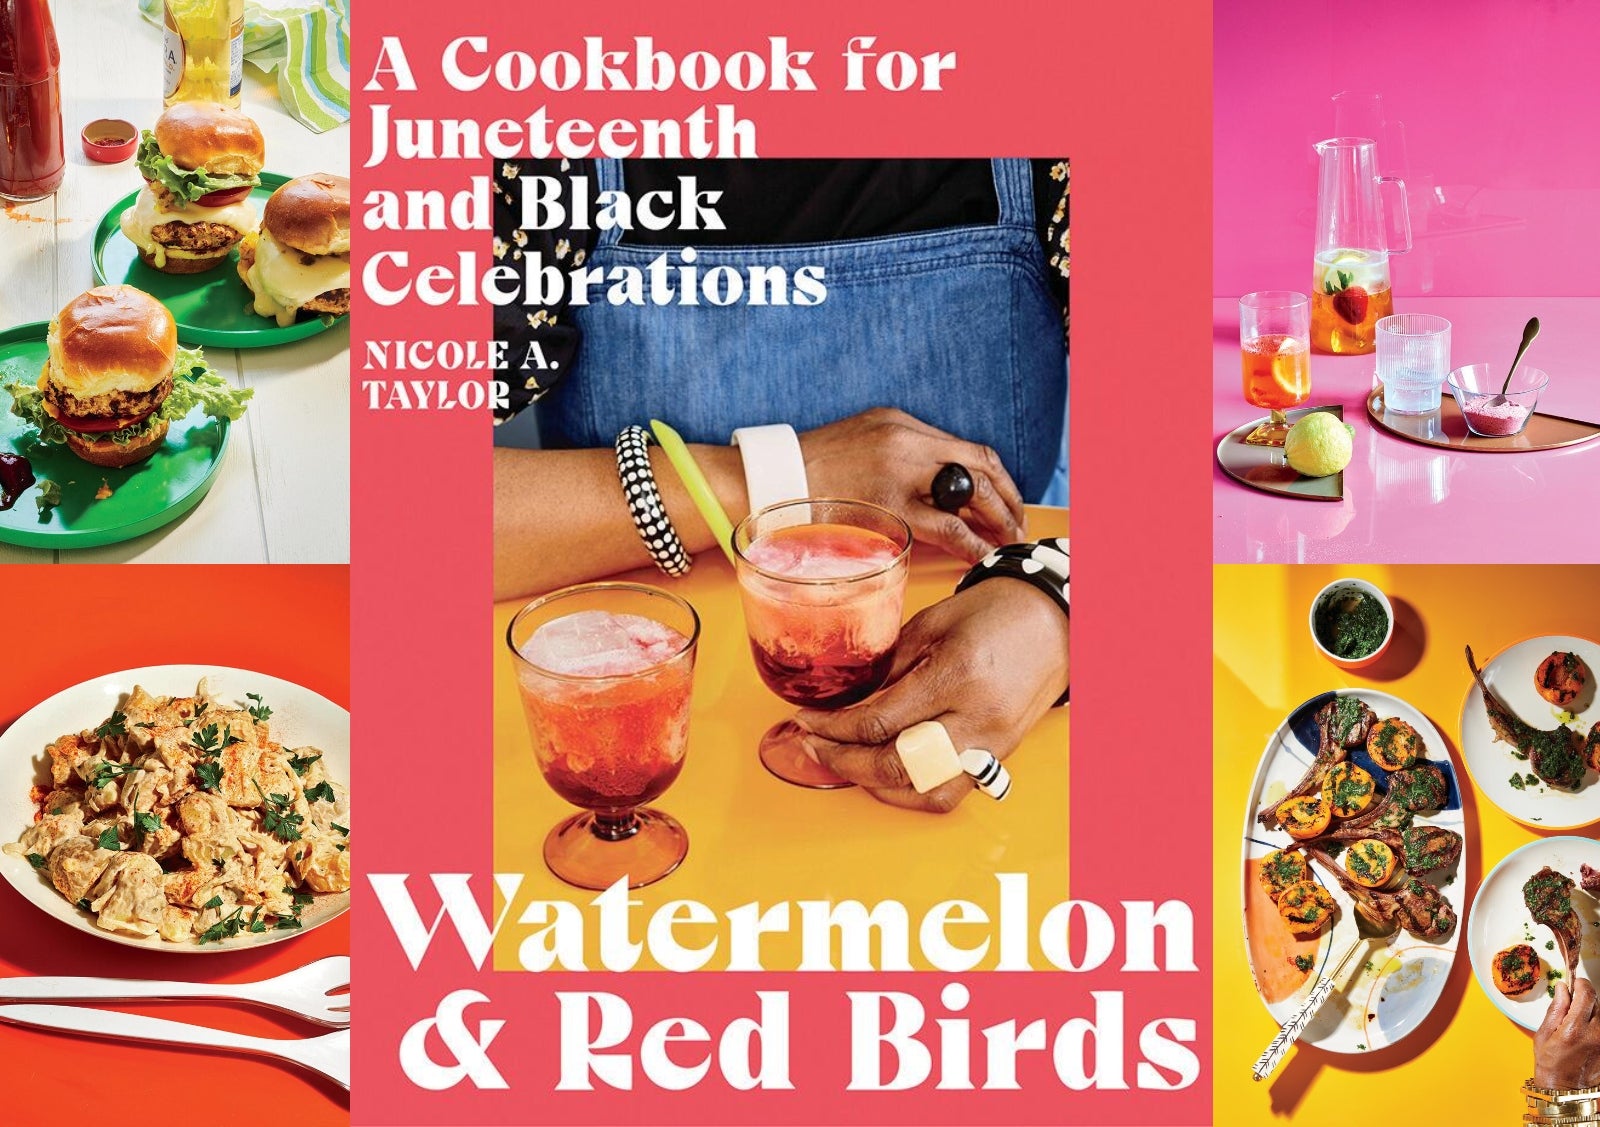 'Watermelon & Red Birds' Author Nicole Taylor On Her Juneteenth Cookbook And Essential Foods To Bring To The Cookout